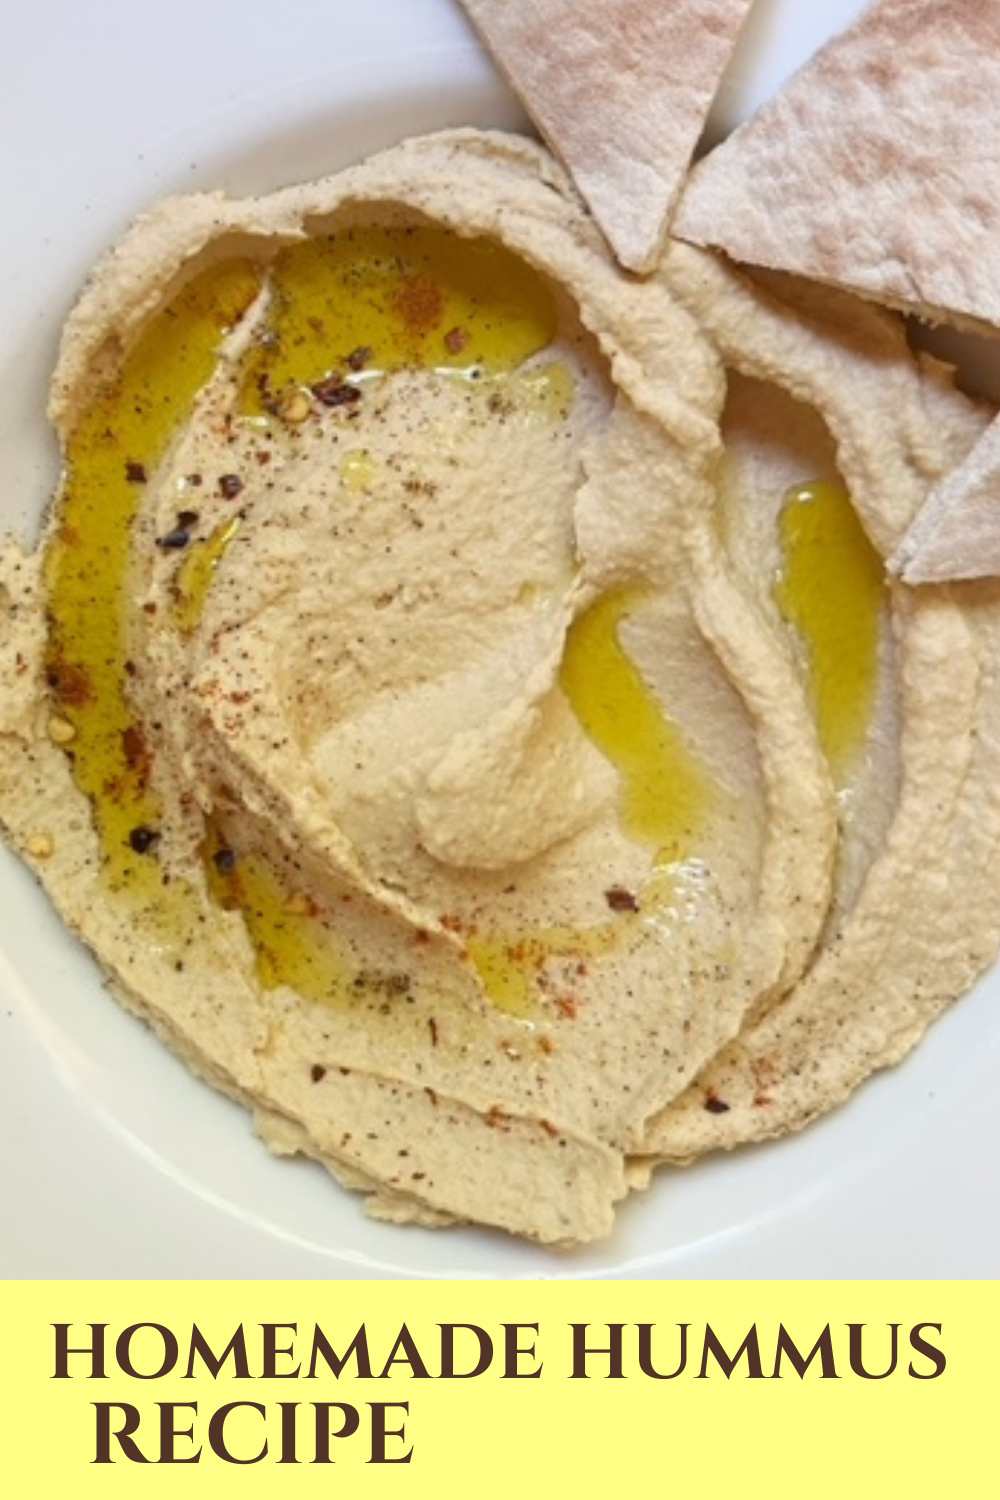 This homemade hummus recipe is super simple to make: throw everything into a blender and blend it up until smooth!